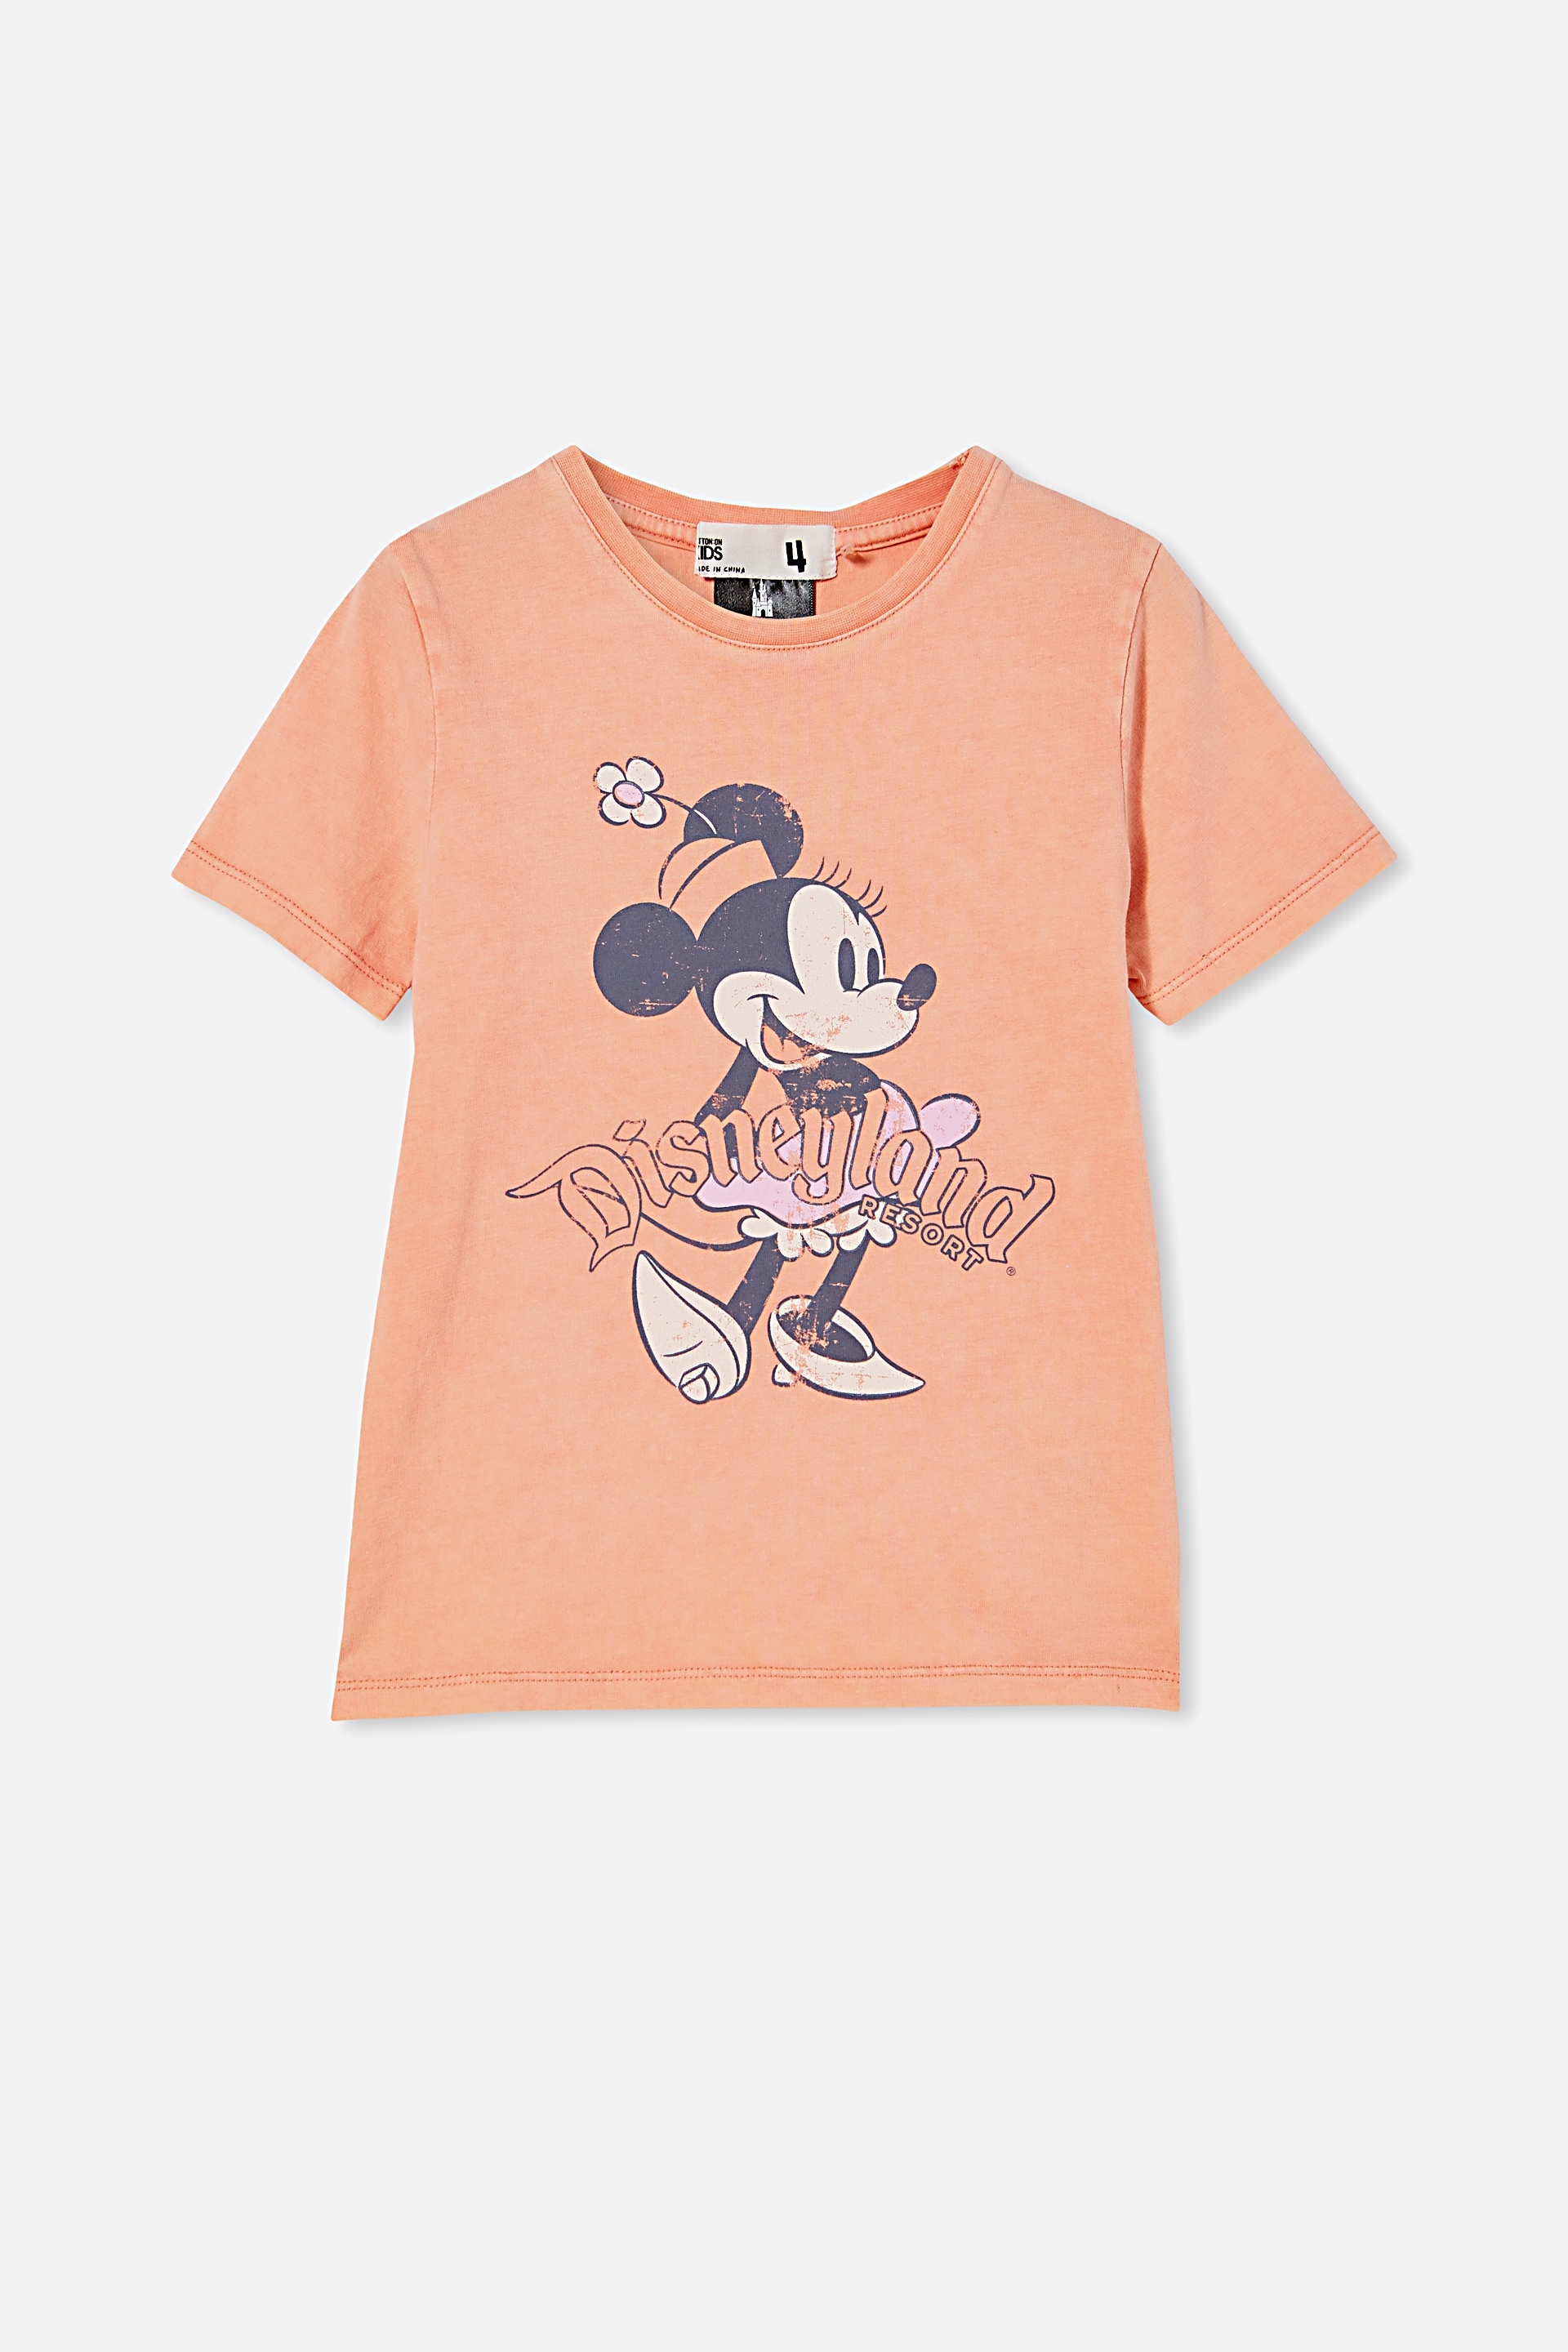 Cotton On Kids - Disneyland Short Sleeve Tee - Lcn dis minnie front and back/musk melon